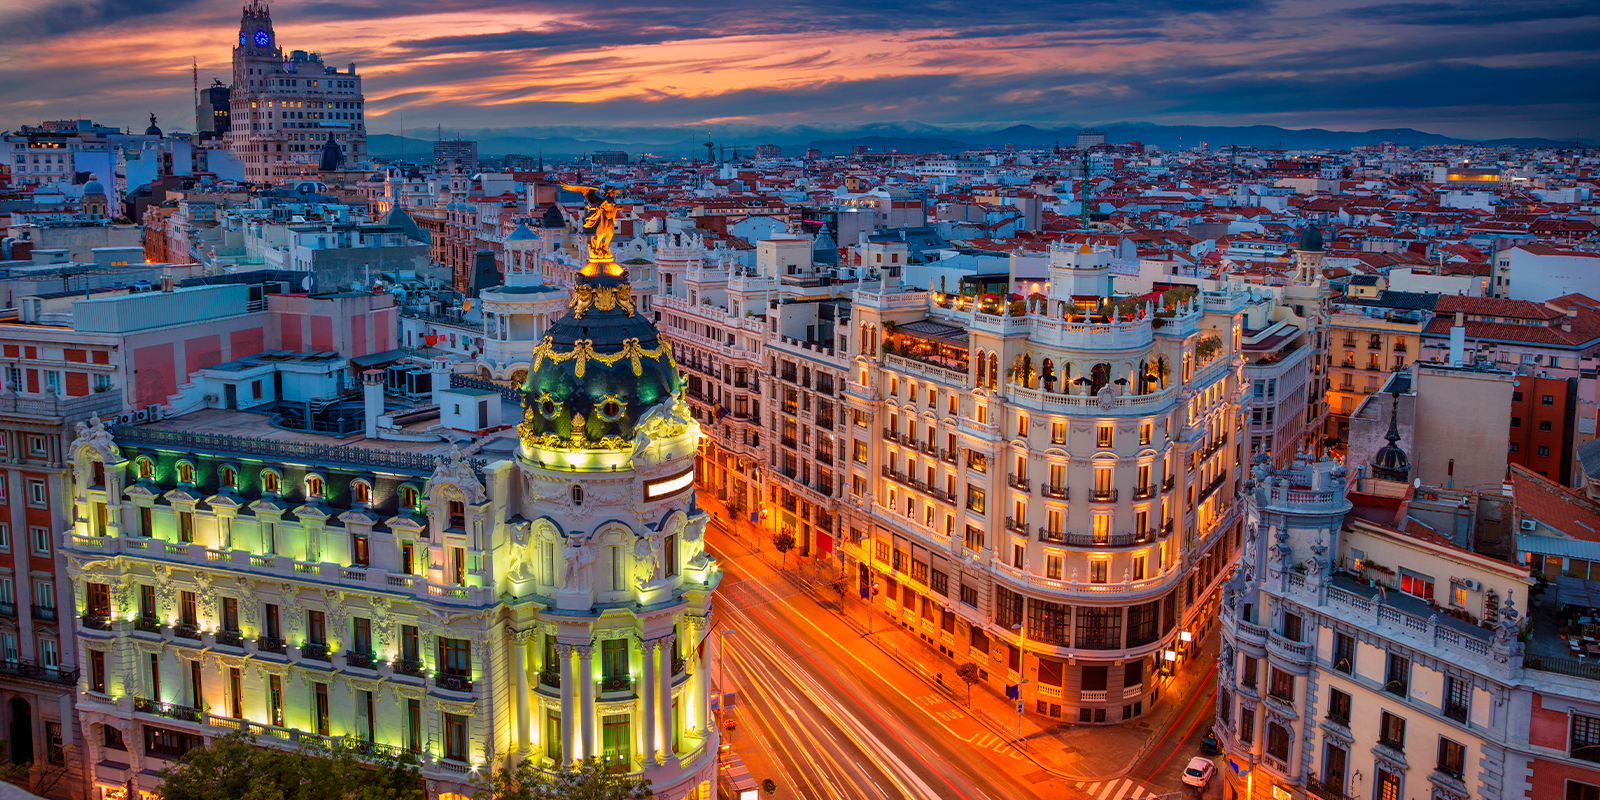 Corporate tax in Spain is paid at a flat rate of 25% while operating costs are extremely competitive